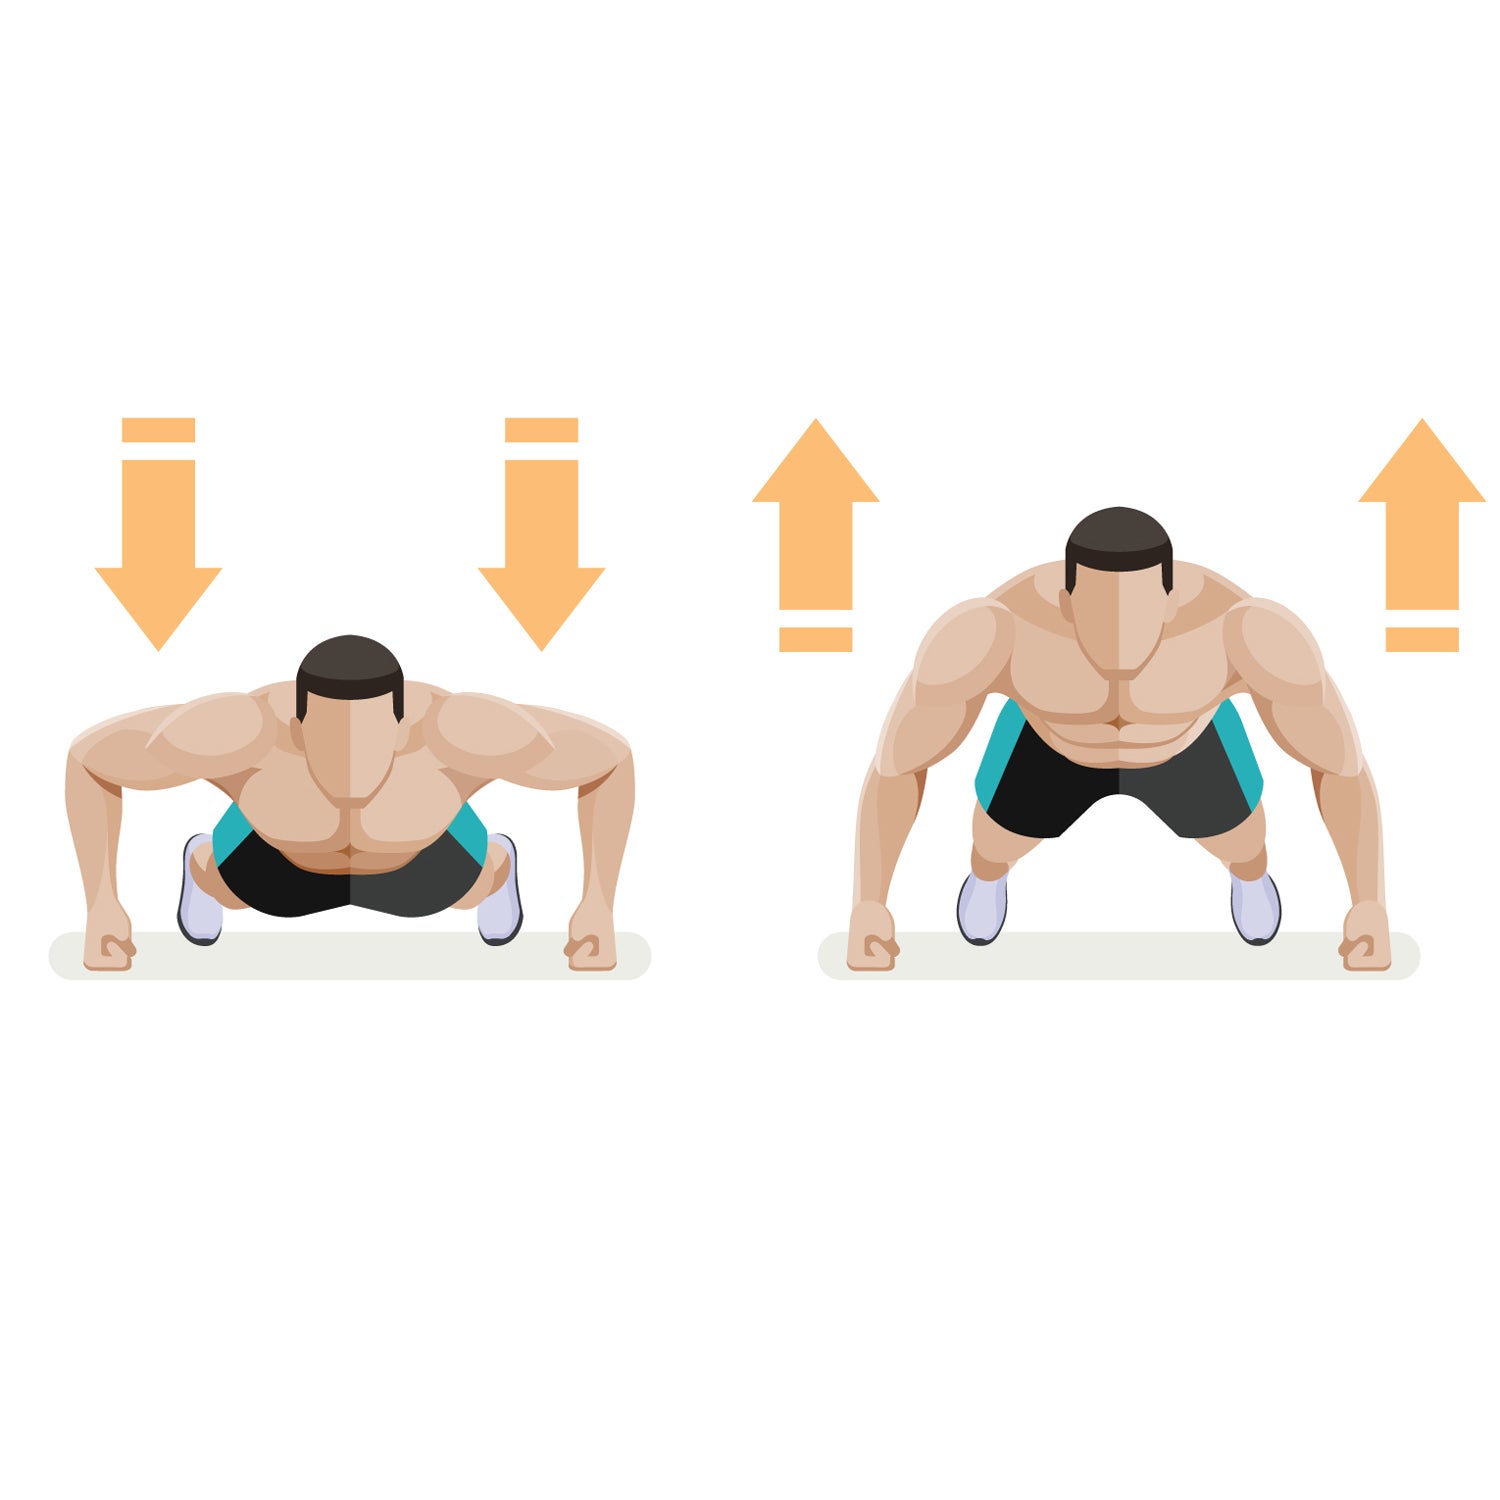 How to Do a Perfect Push-Up